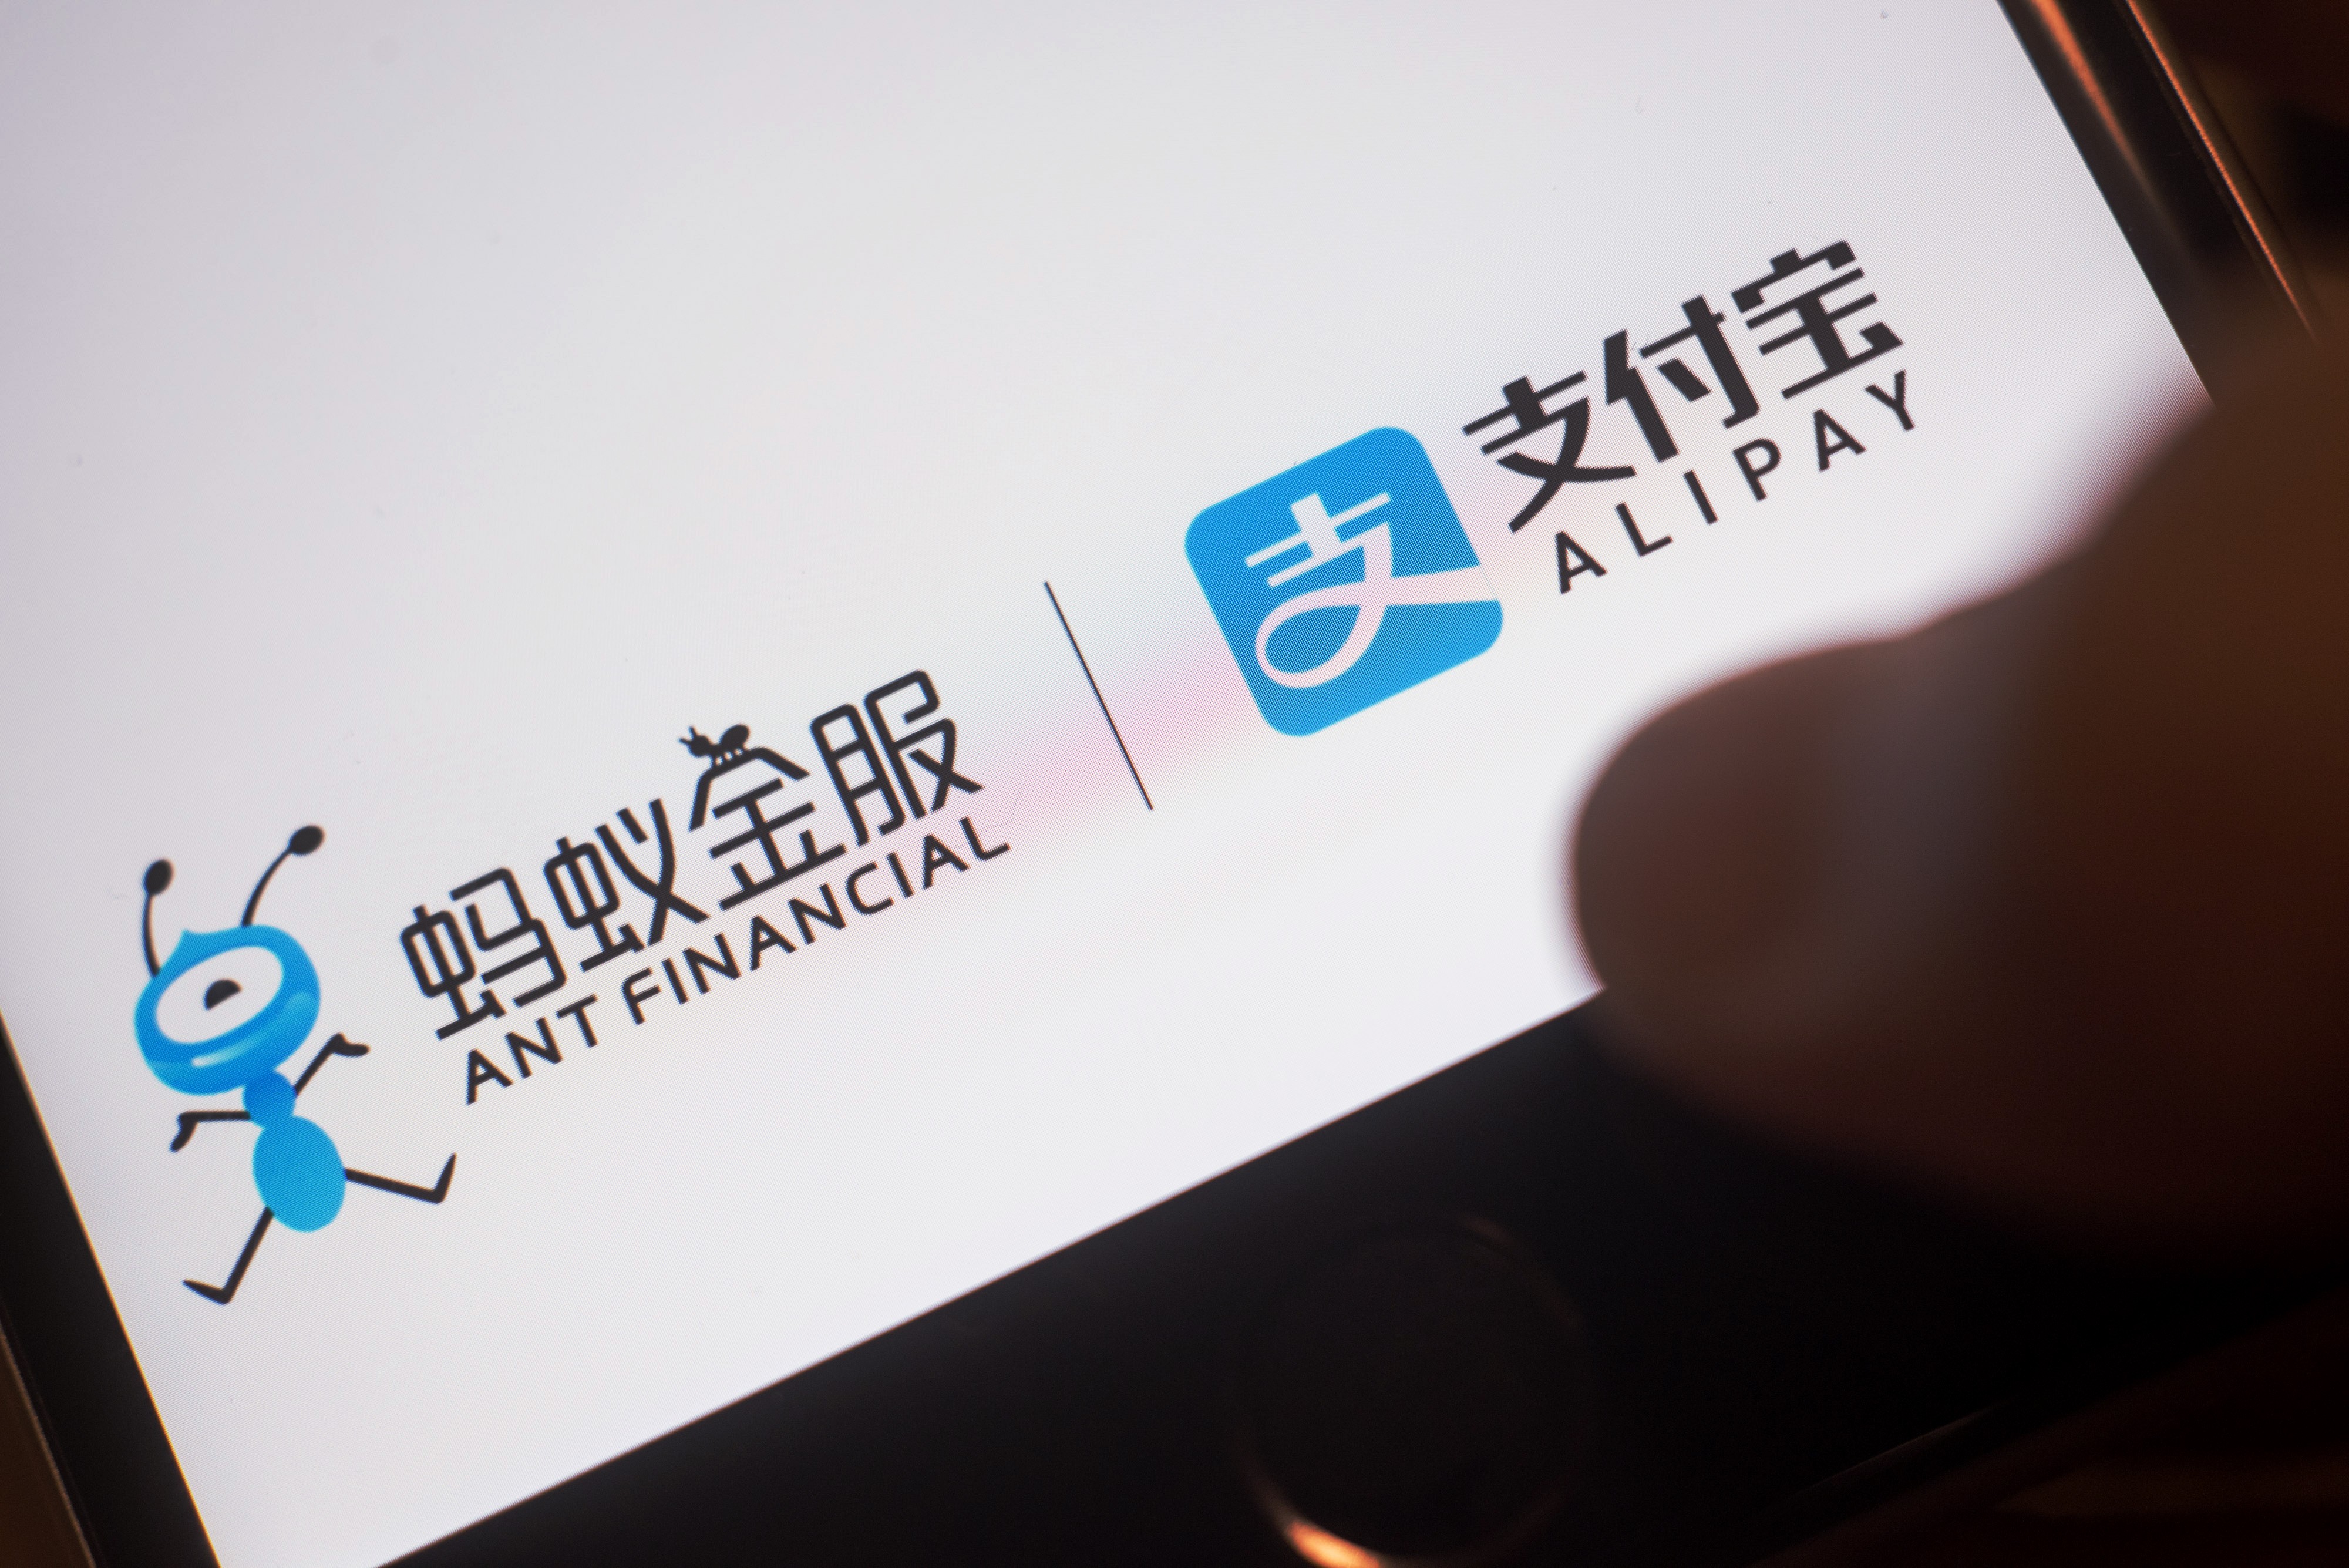 The loading page for Ant Financial’s Alipay application is displayed on an iPhone. Photo: Bloomberg